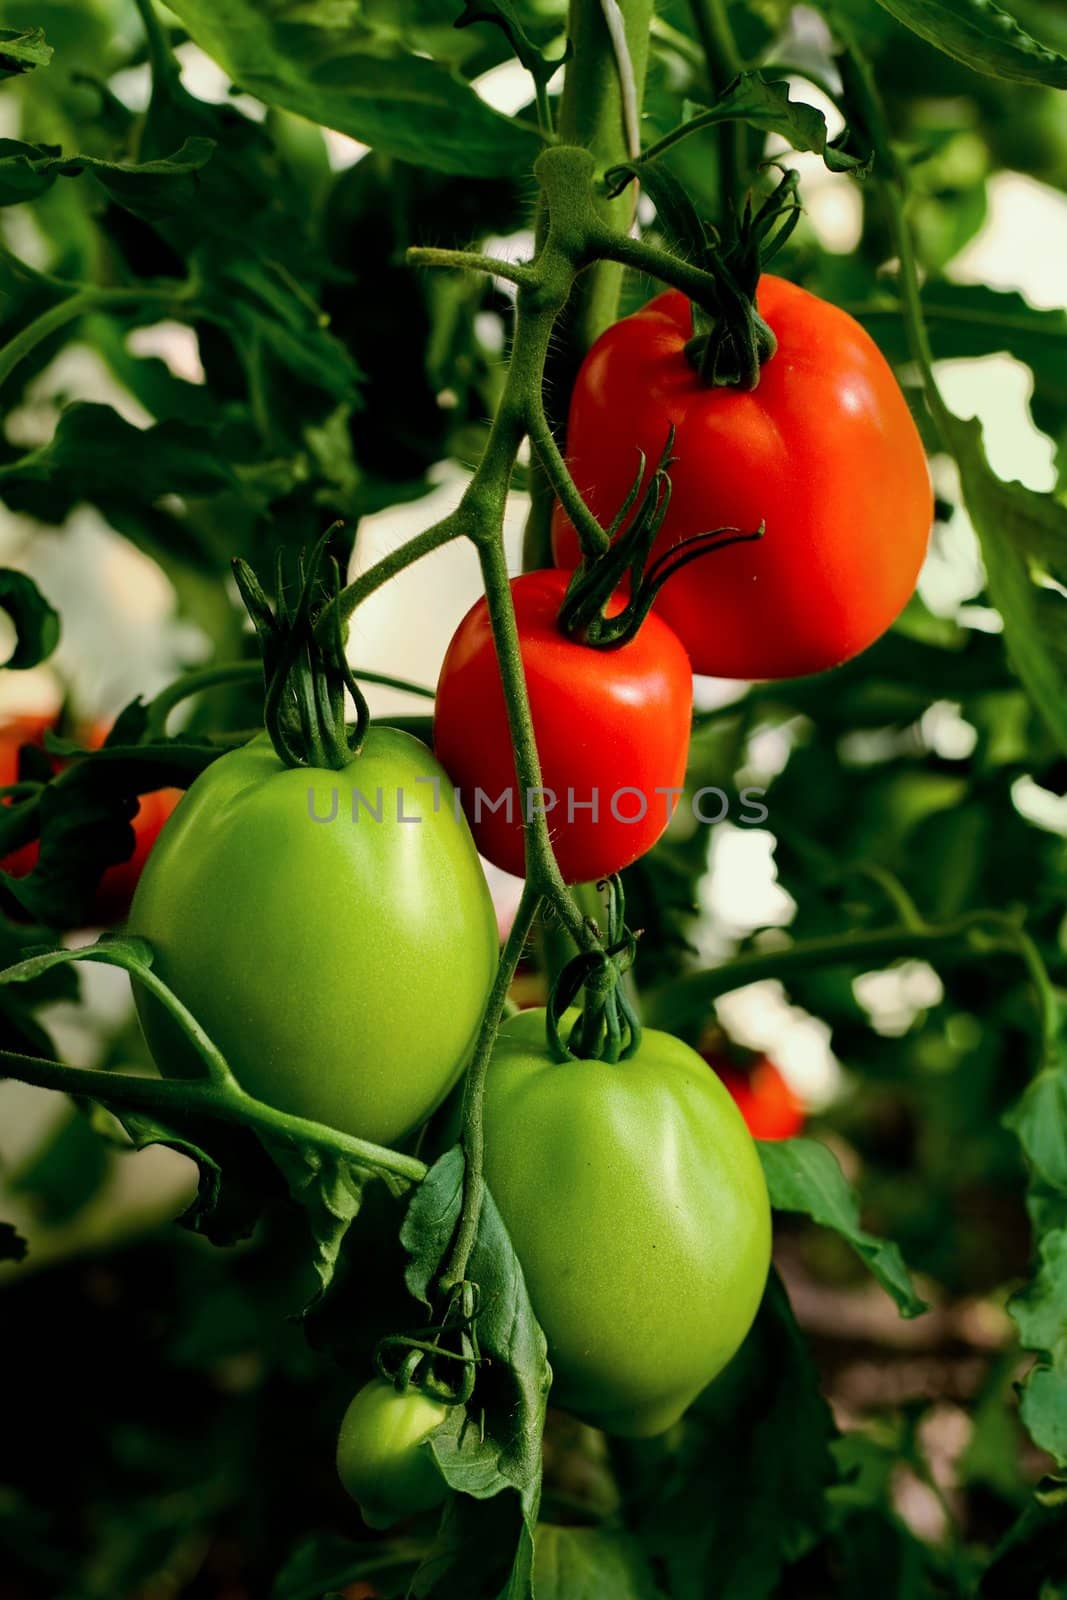 red and green tomatoes in greenhouses. Closeup